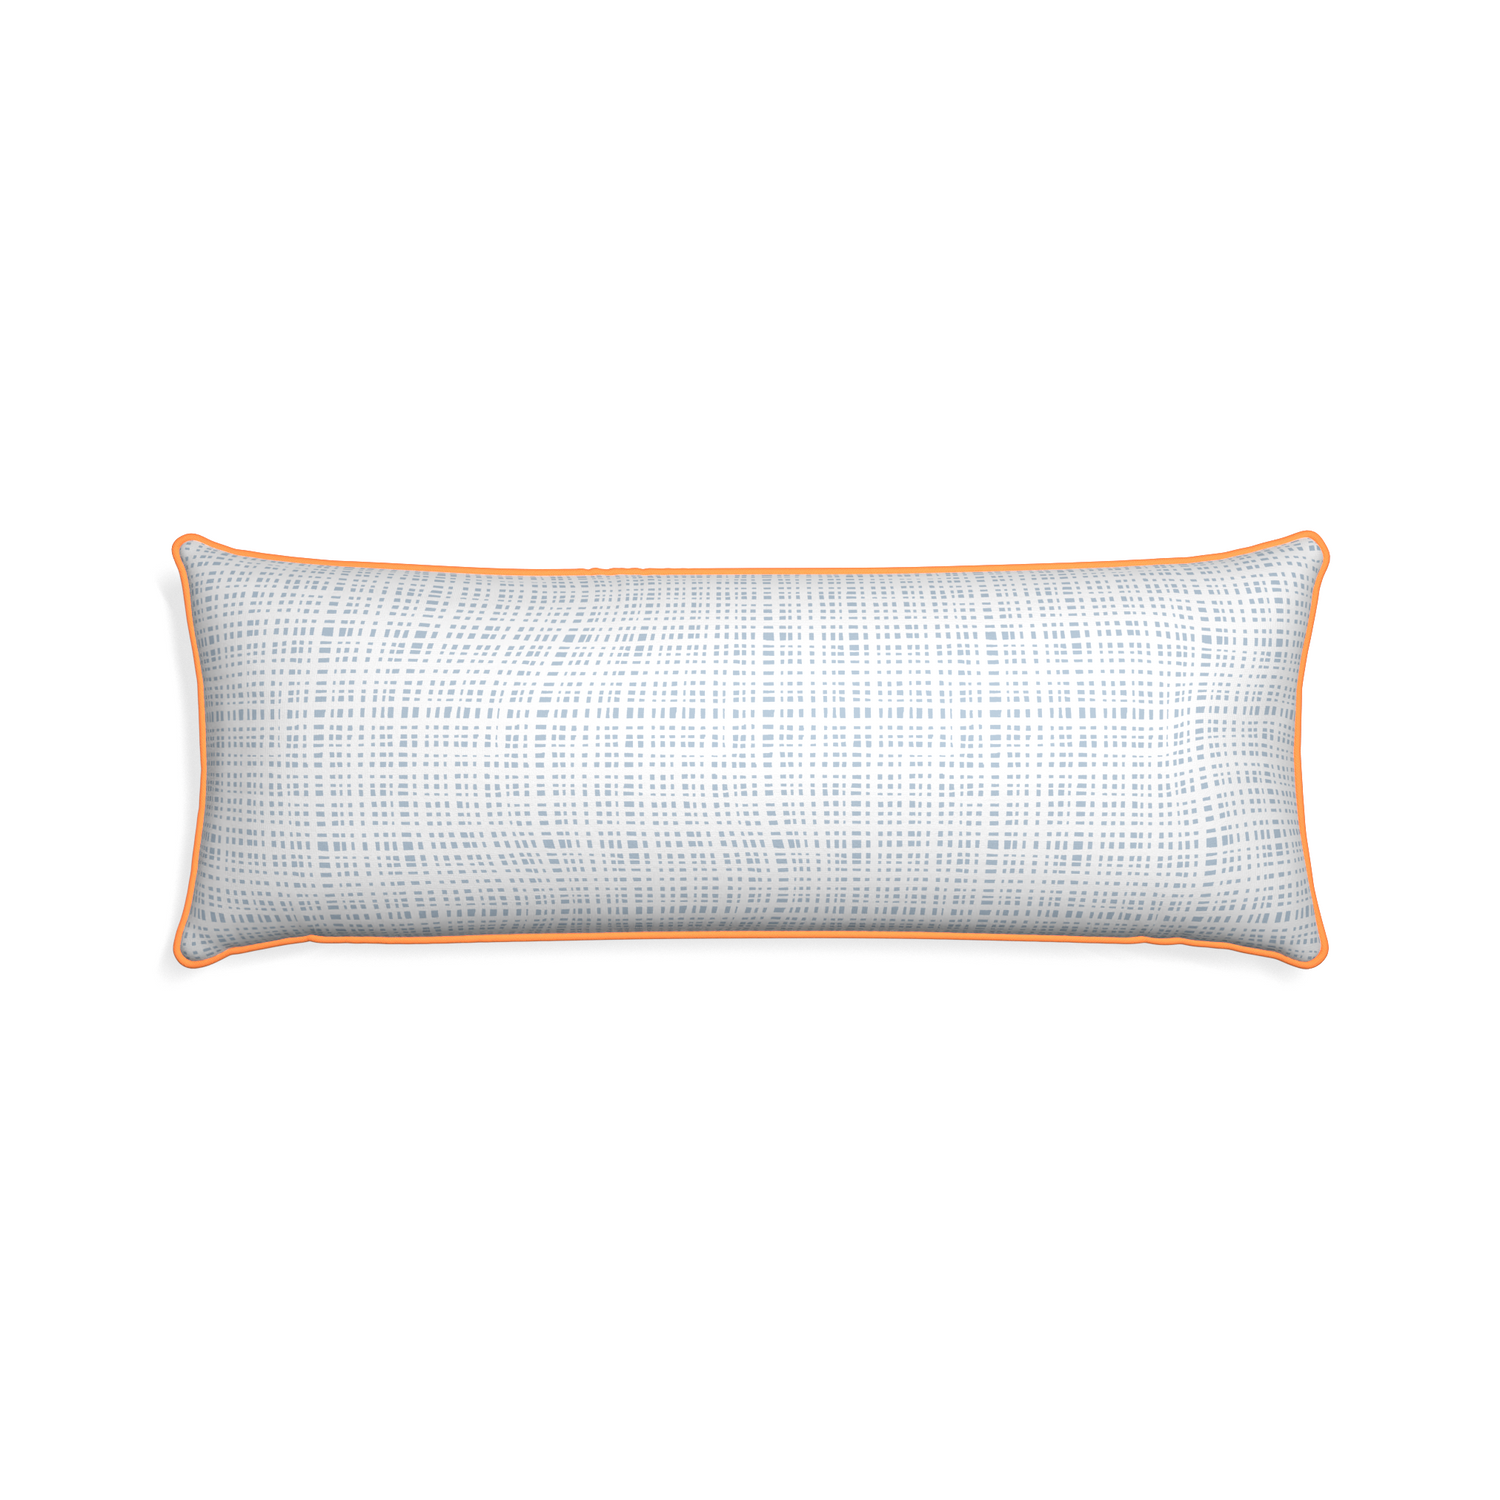 Xl-lumbar ginger sky custom pillow with clementine piping on white background